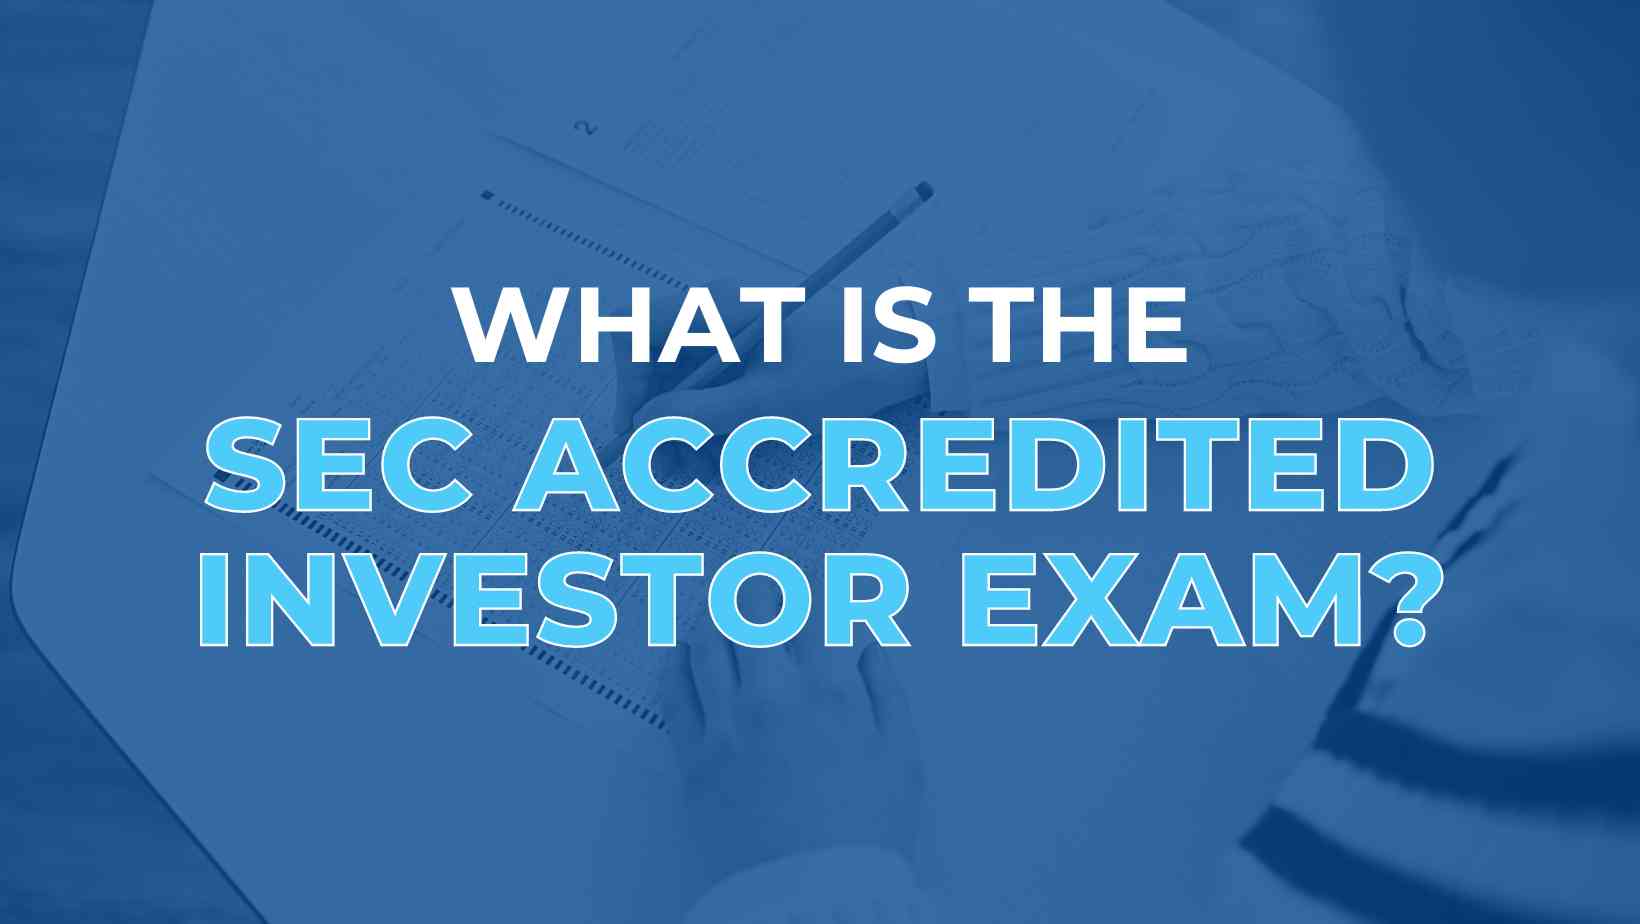 what-is-the-SEC-accredited-investor-exam